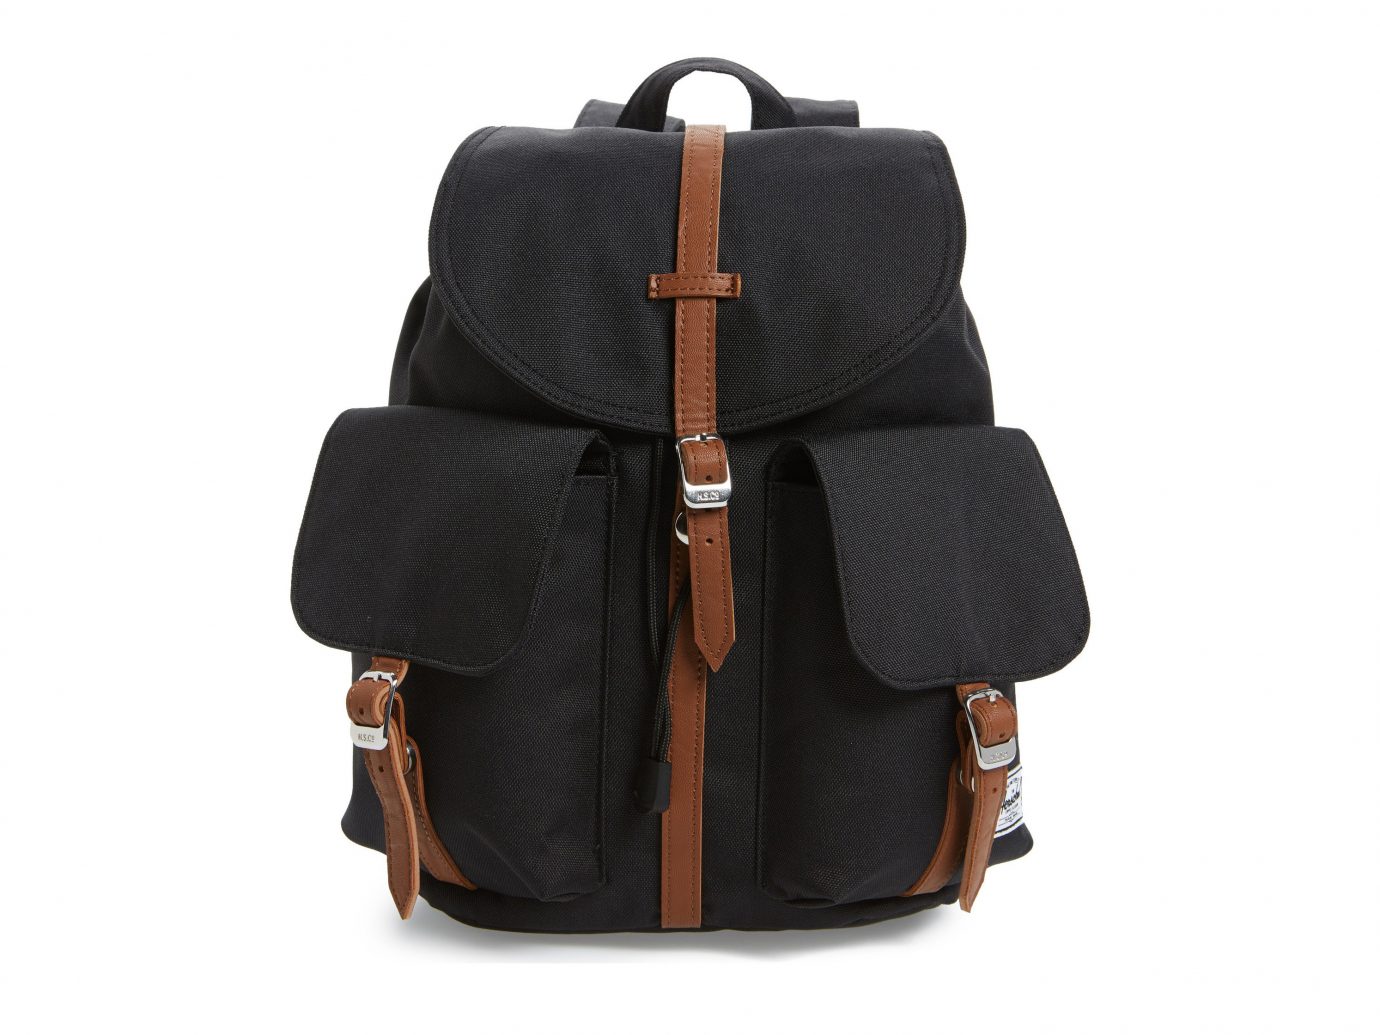 Style + Design bag product leather backpack product design accessory luggage & bags hand luggage baggage